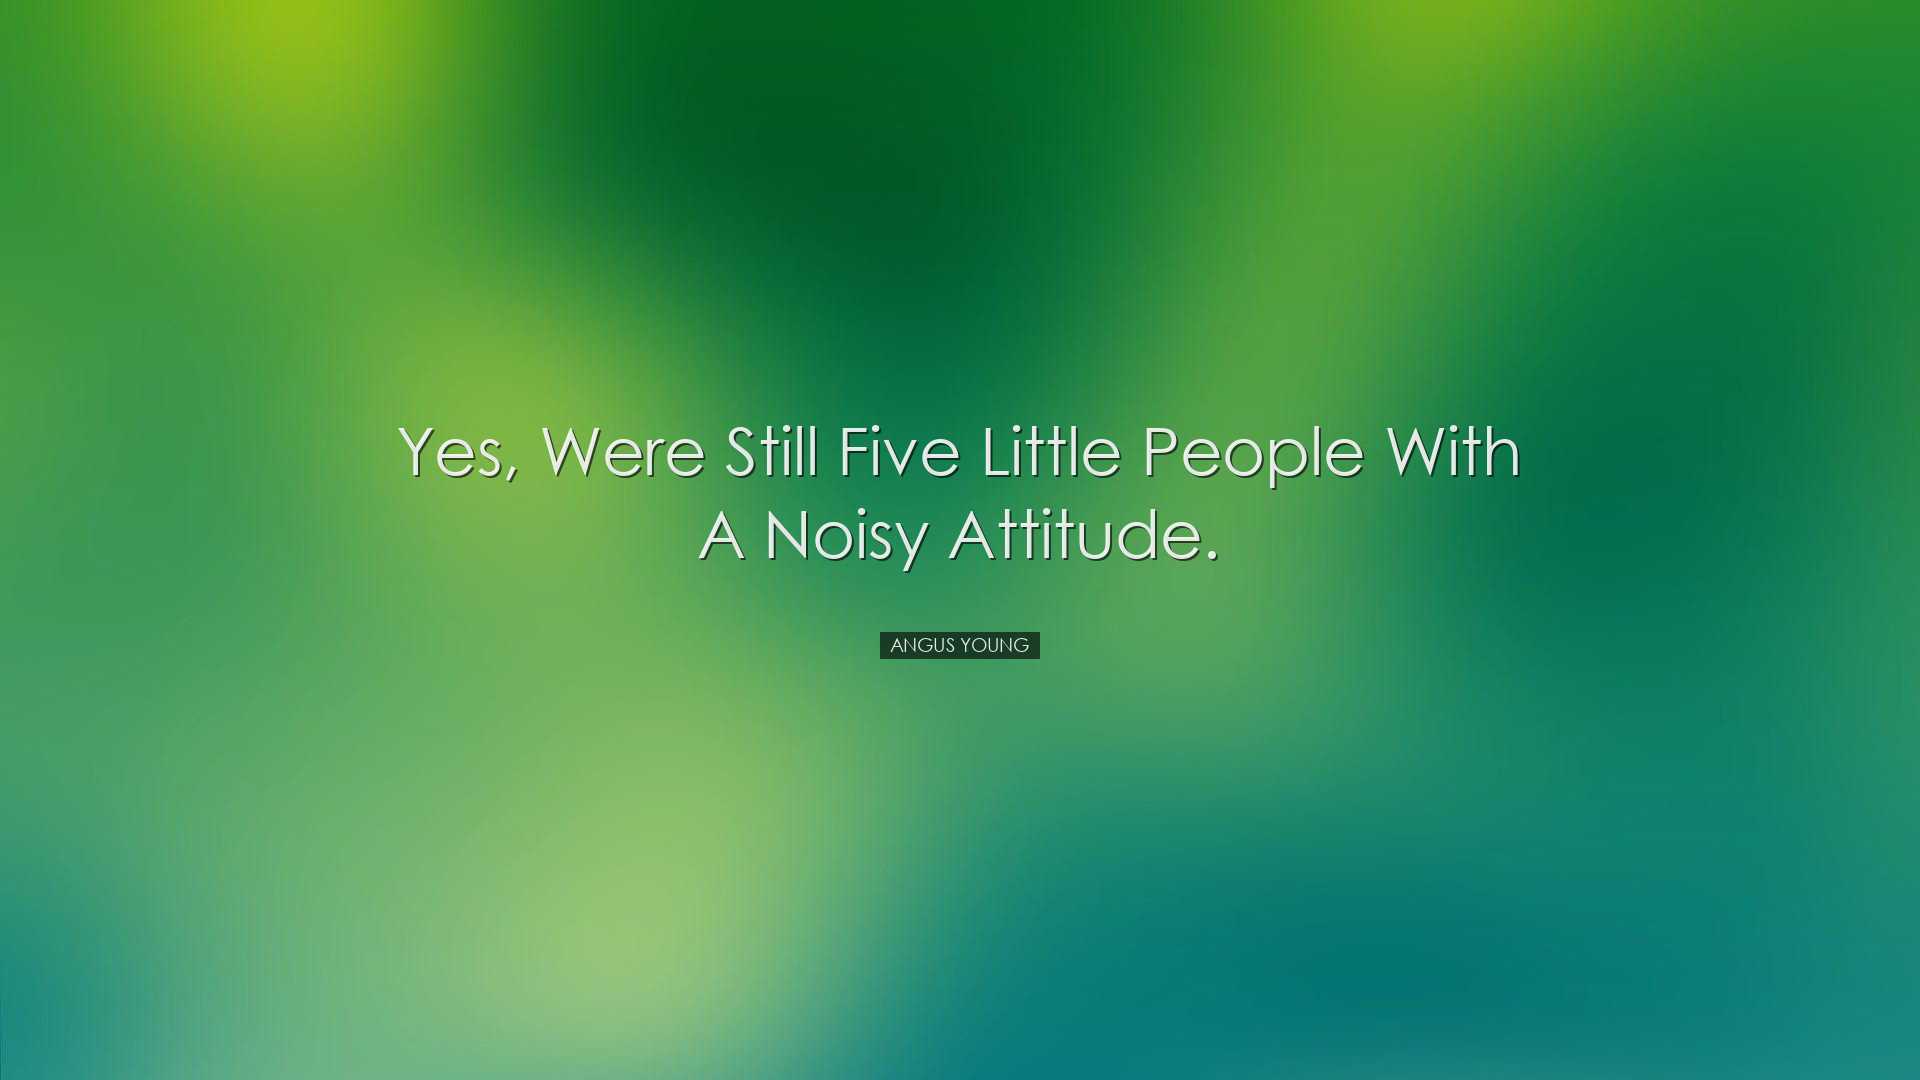 Yes, were still five little people with a noisy attitude. - Angus